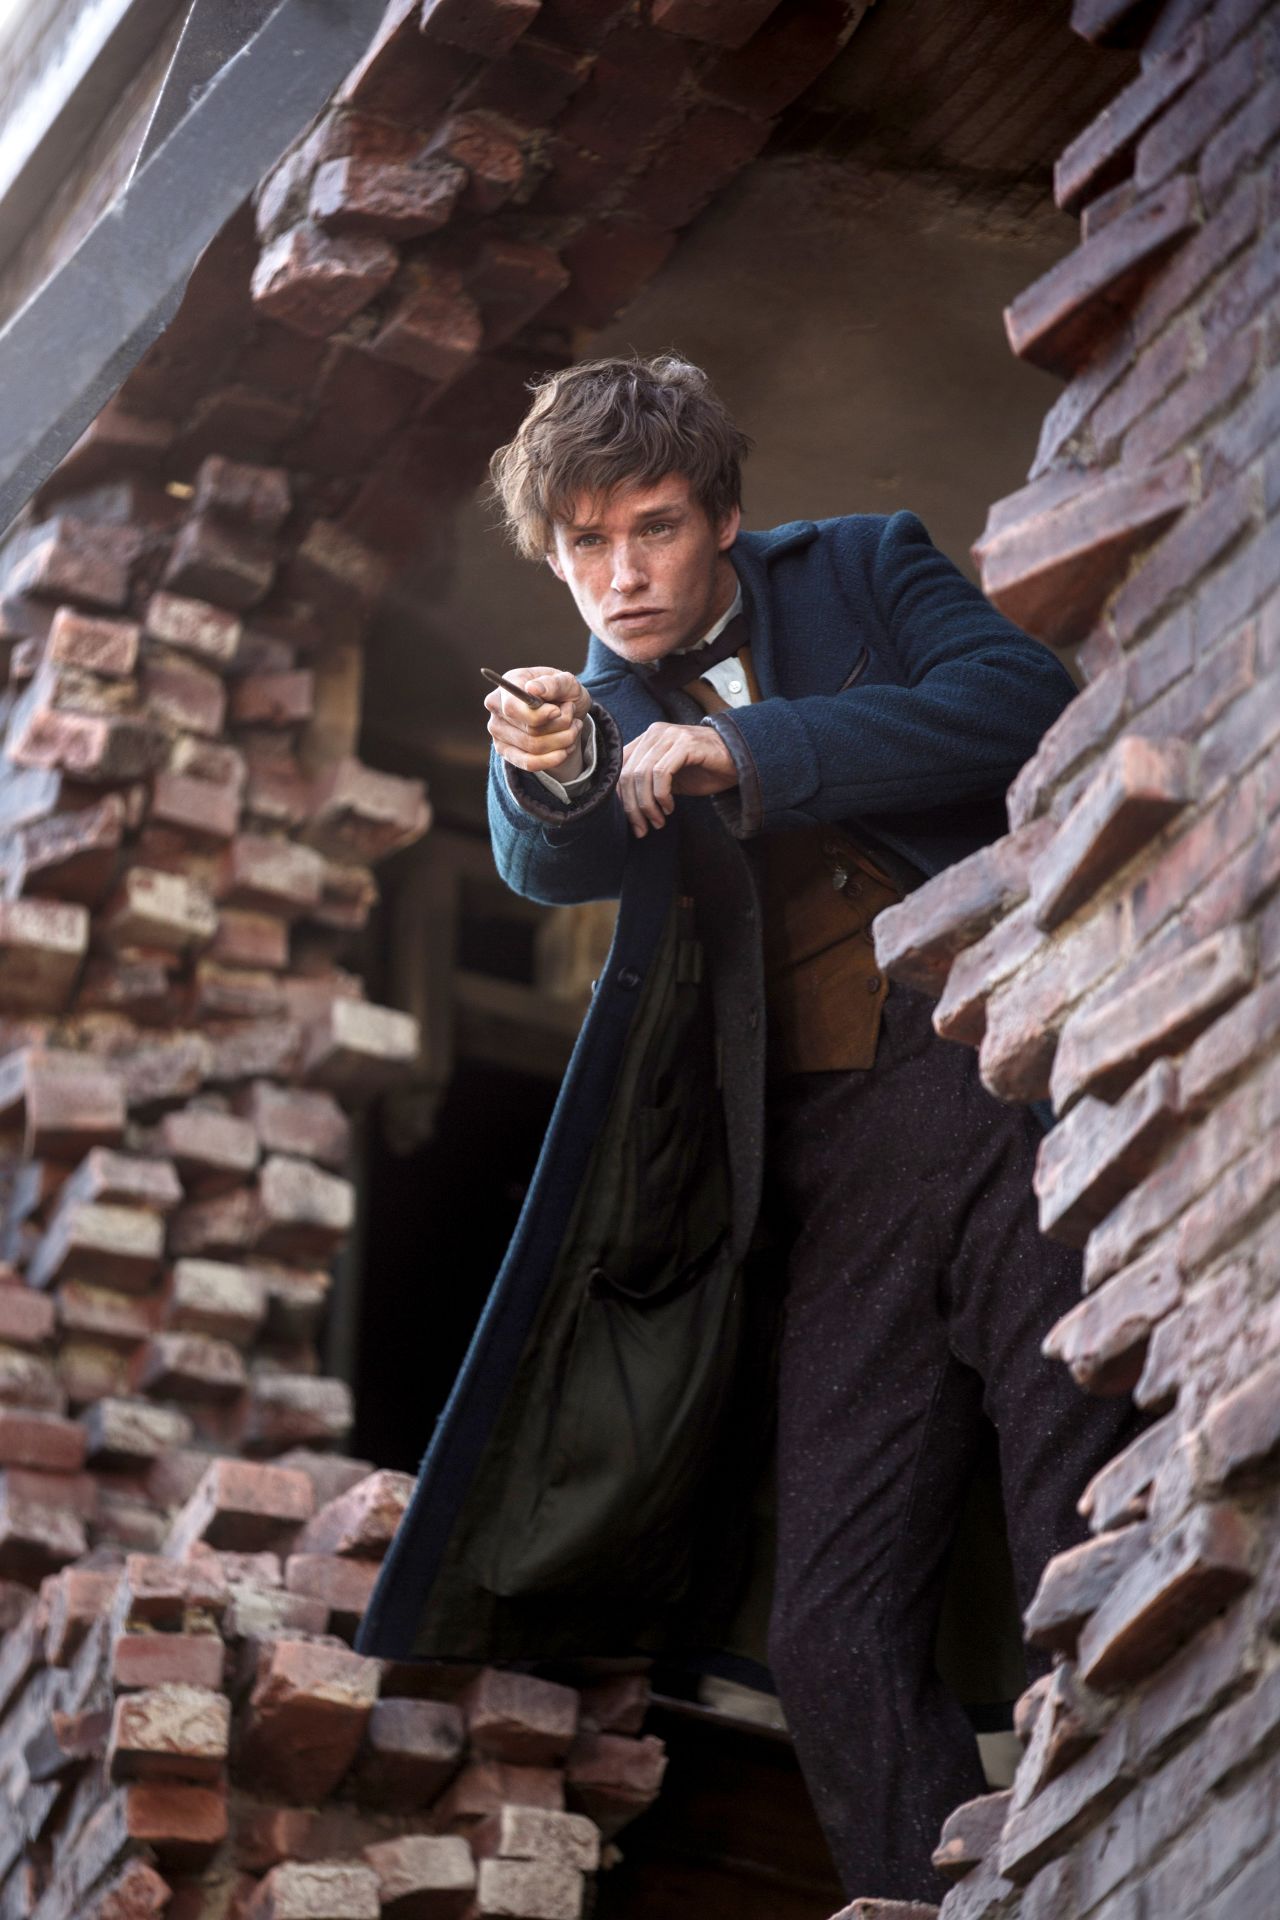 <strong>"Fantastic Beasts and Where to Find Them":</strong> Years before Harry Potter reads his book at school, writer Newt Scamander leads an exciting adventure to New York's secret community of witches and wizards. <strong>(HBO Now)</strong>